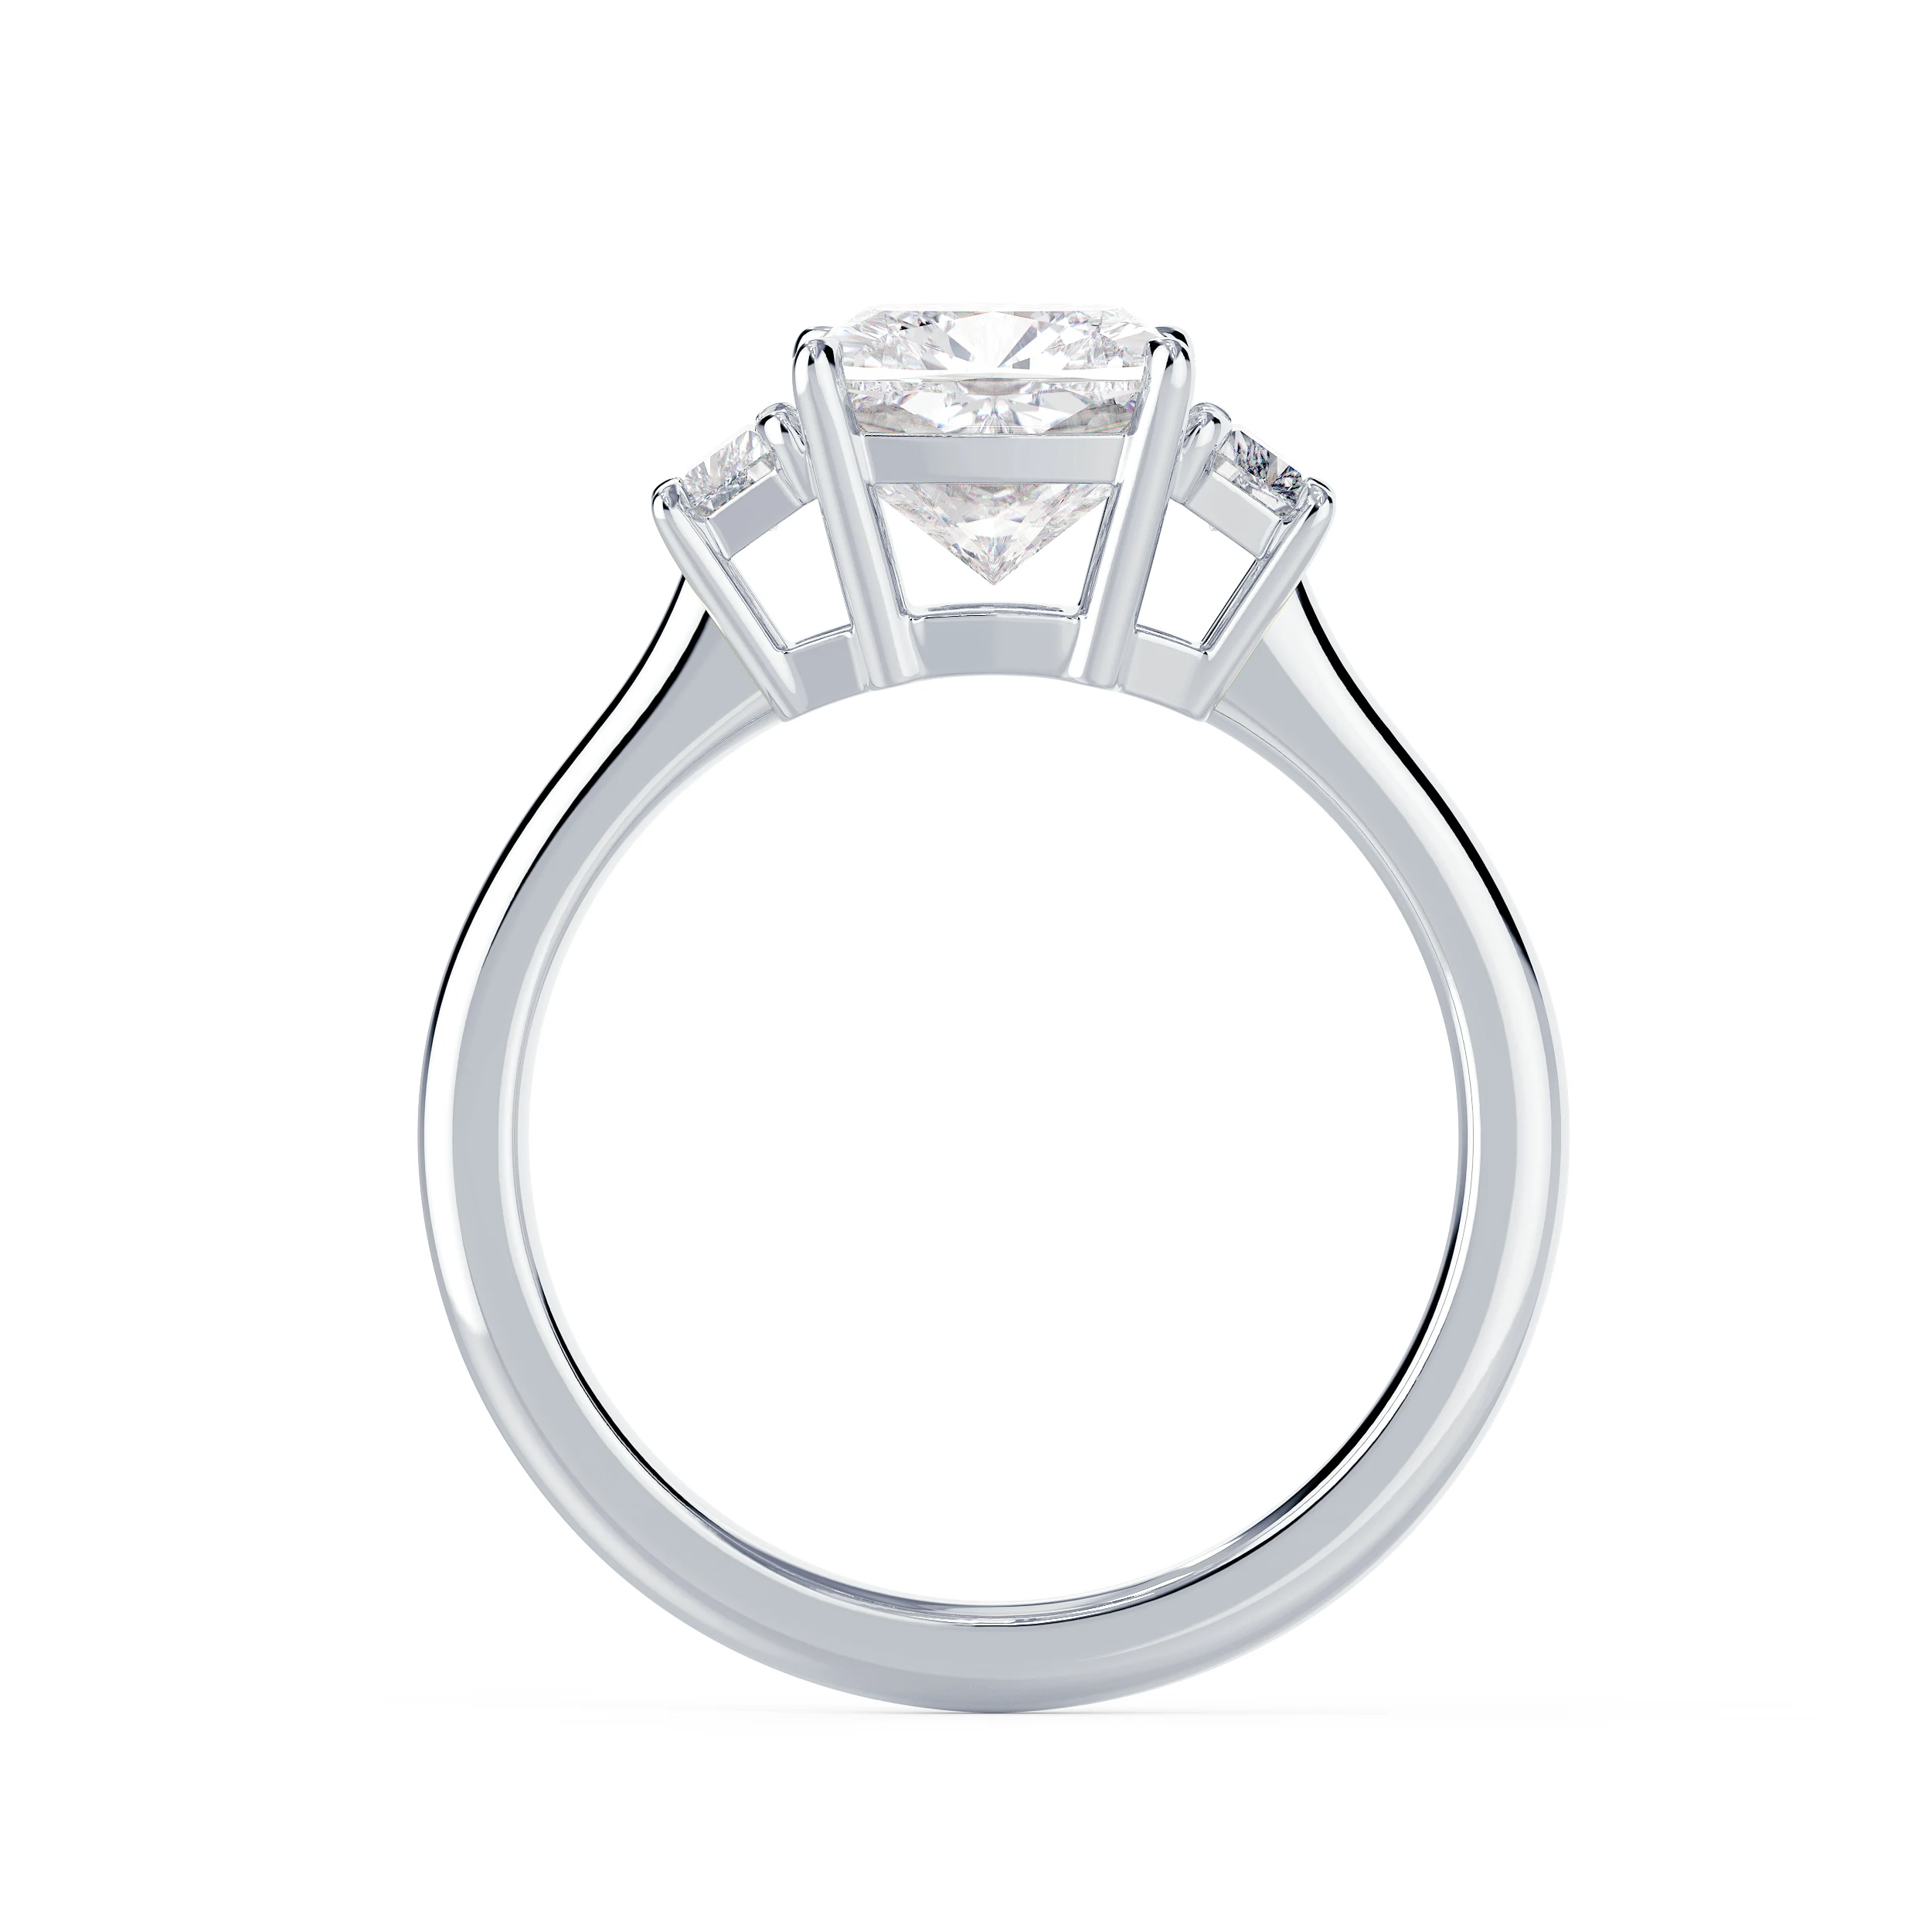 Exceptional Quality Lab Grown Diamonds set in White Gold Cushion and Trapezoid Setting (Profile View)